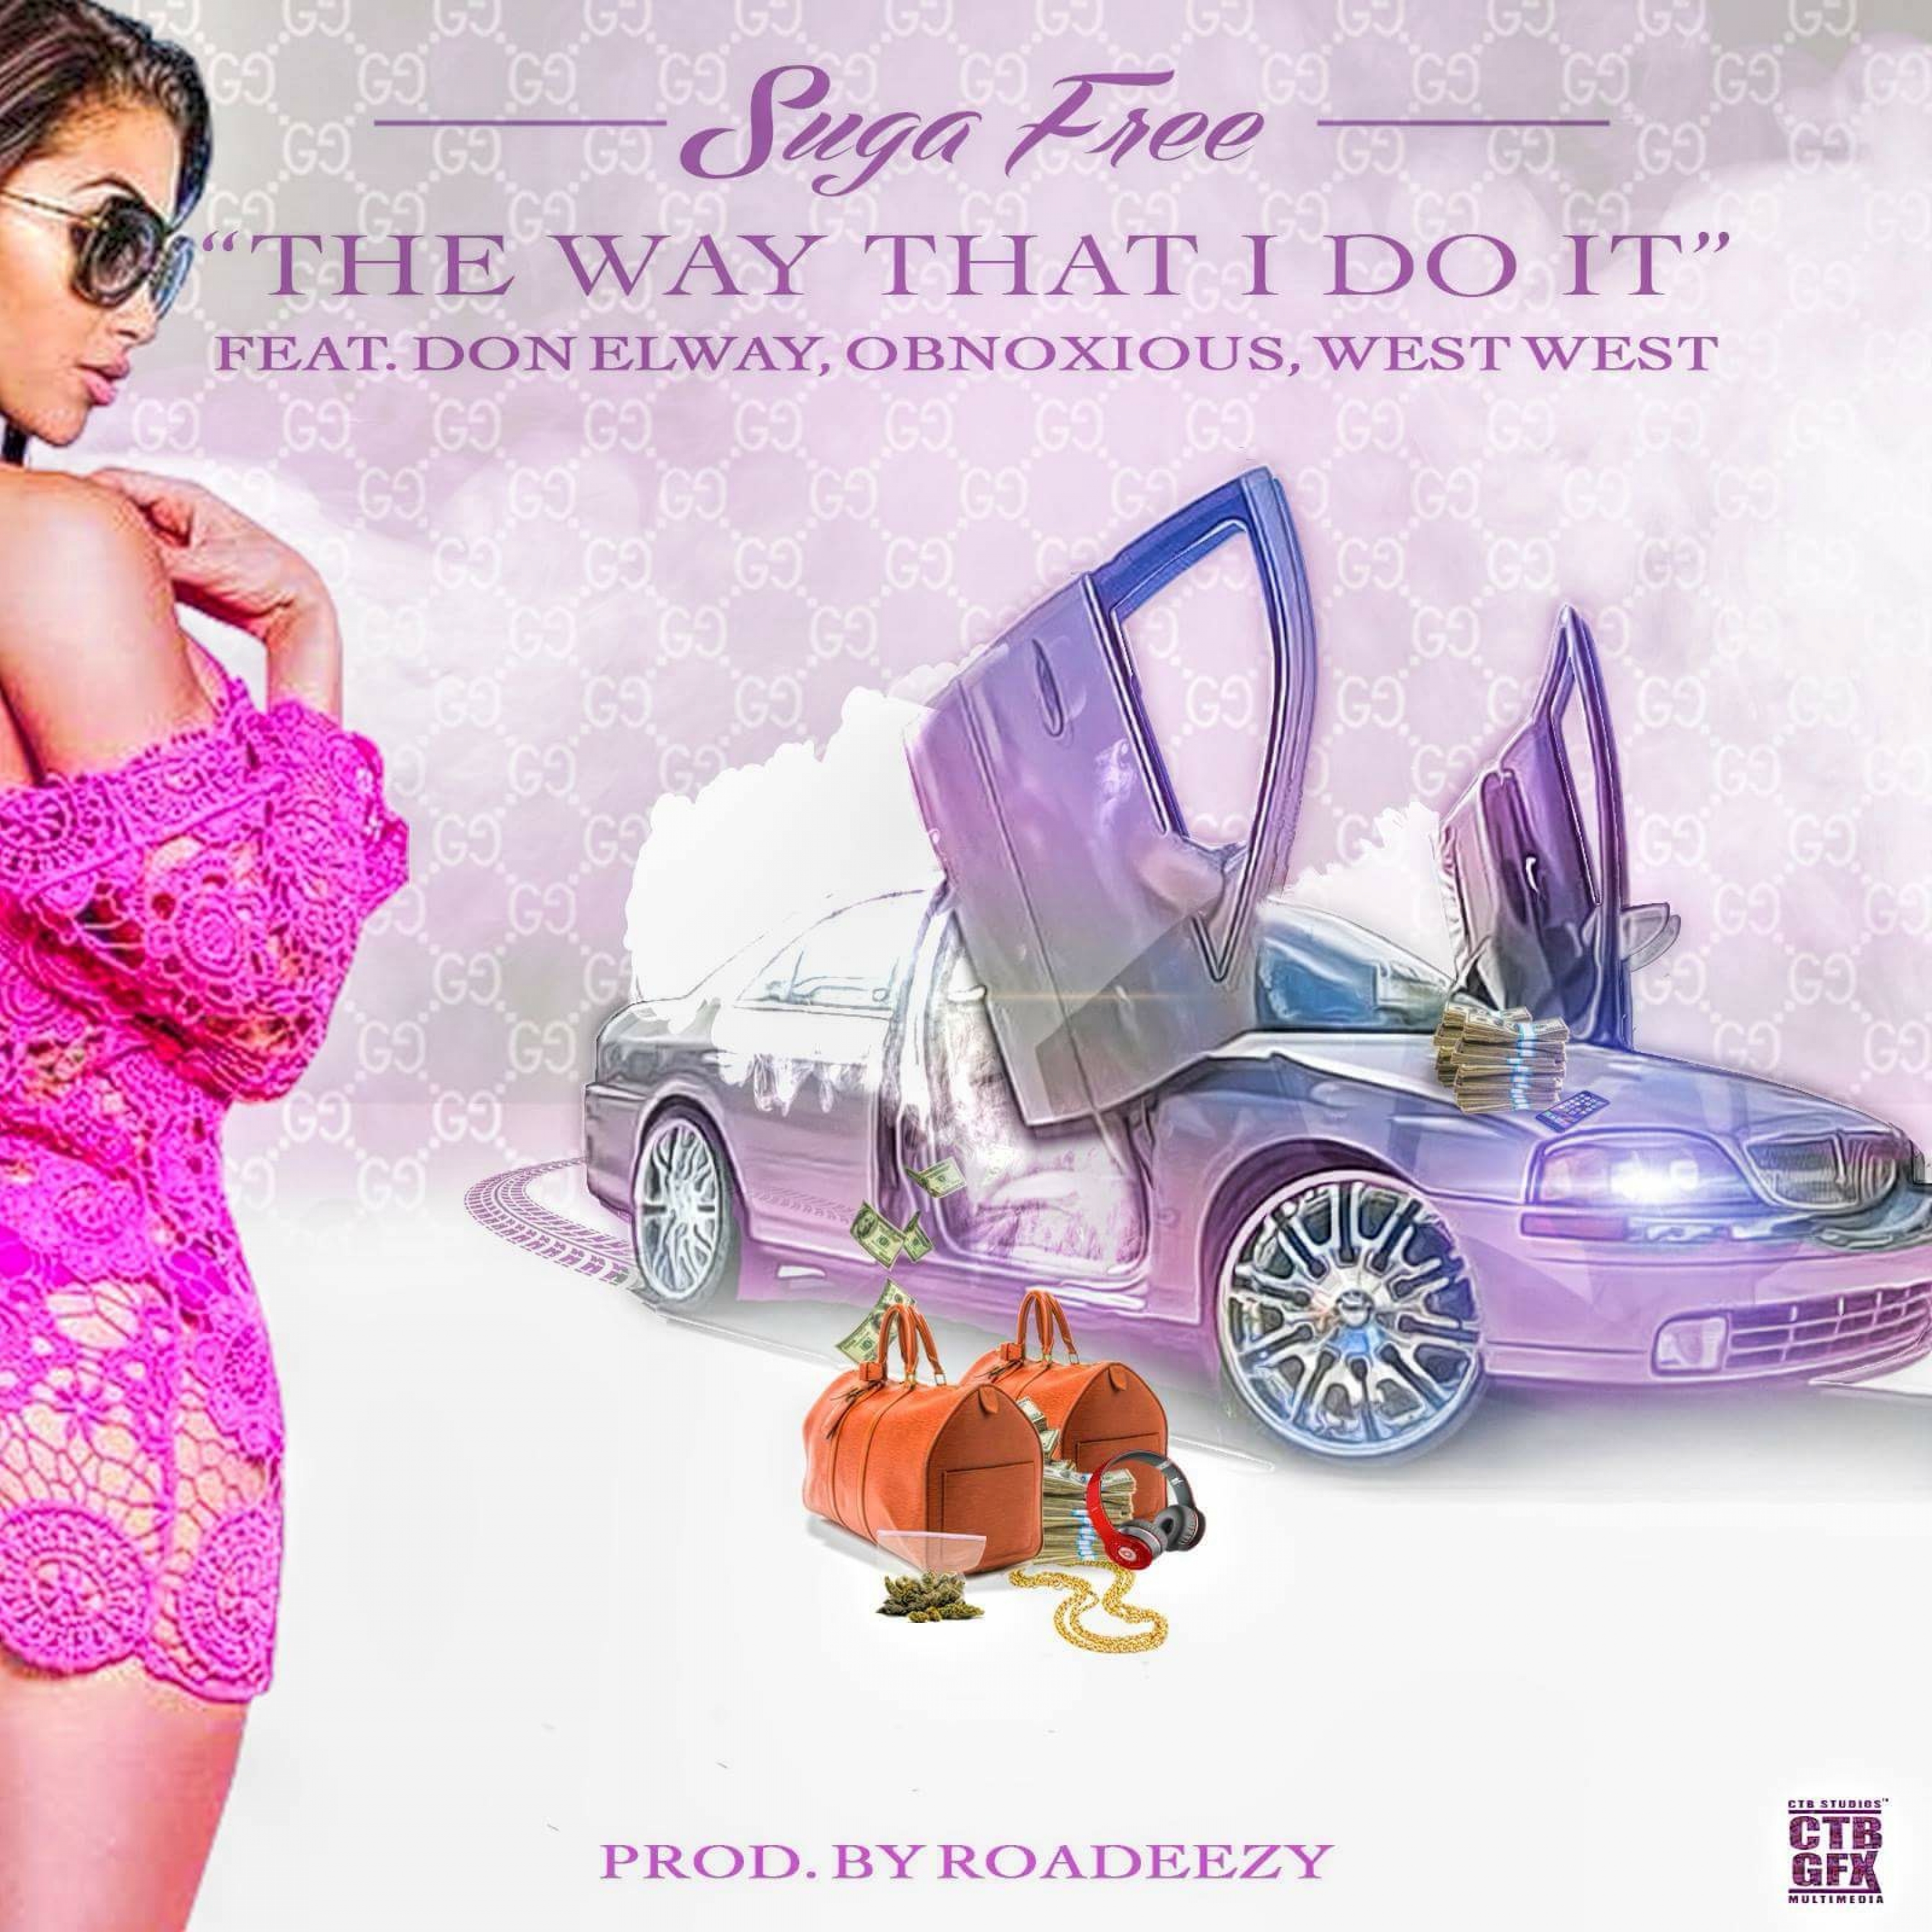 The Way That I Do It (feat. Don Elway, Obnoxious & West West) - Single